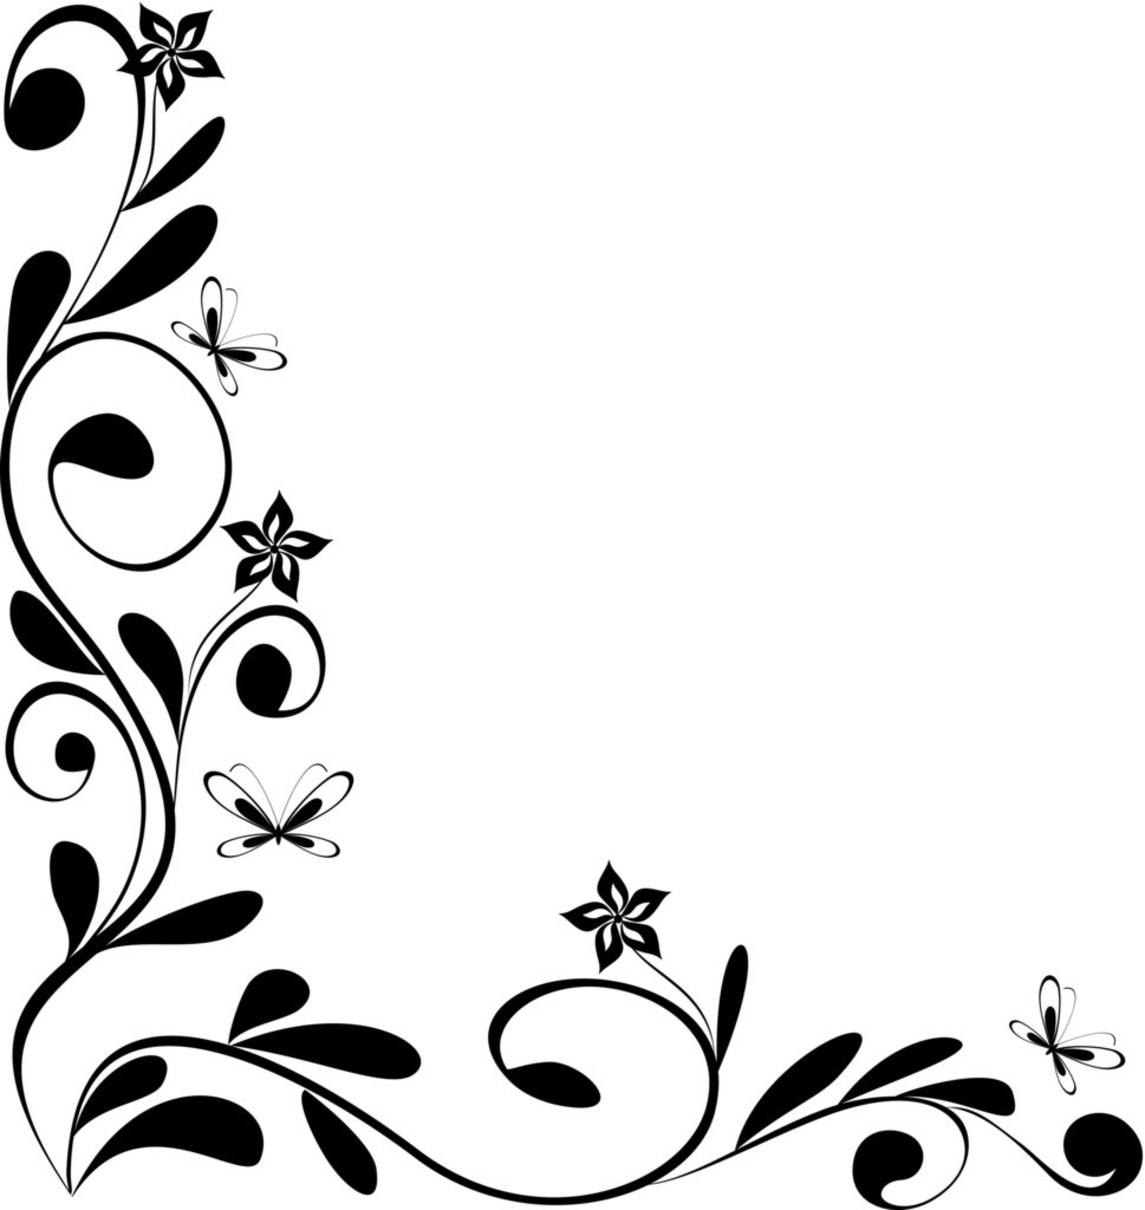 Simple Flower Border Designs To Draw - Clipart library